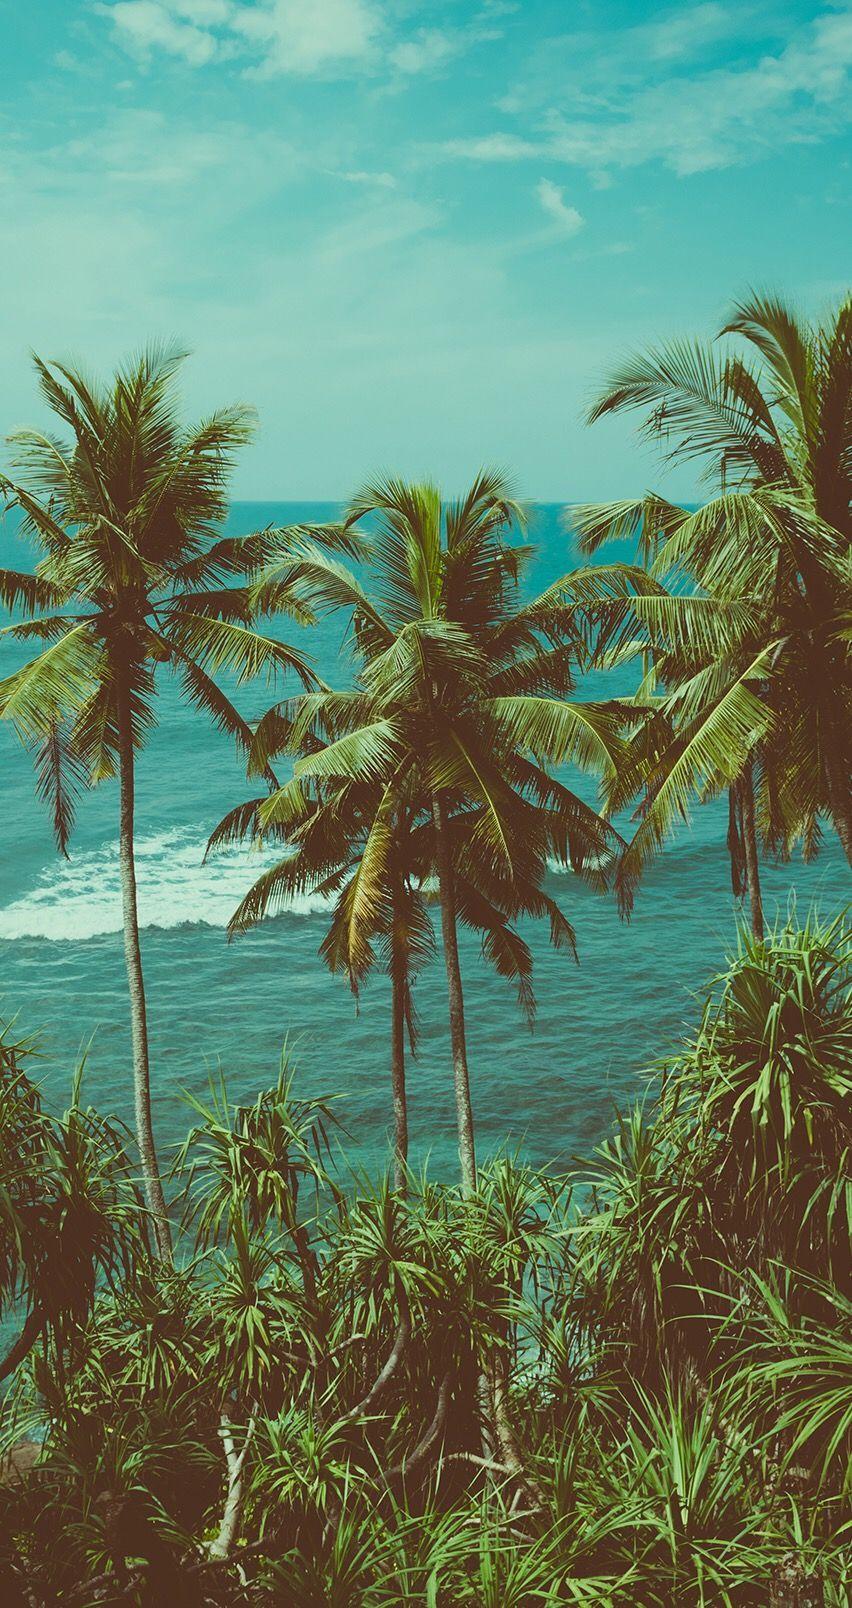 Tropical Aesthetic Wallpapers Top Free Tropical Aesthetic Backgrounds Wallpaperaccess Image shared by tropical x blog. tropical aesthetic wallpapers top